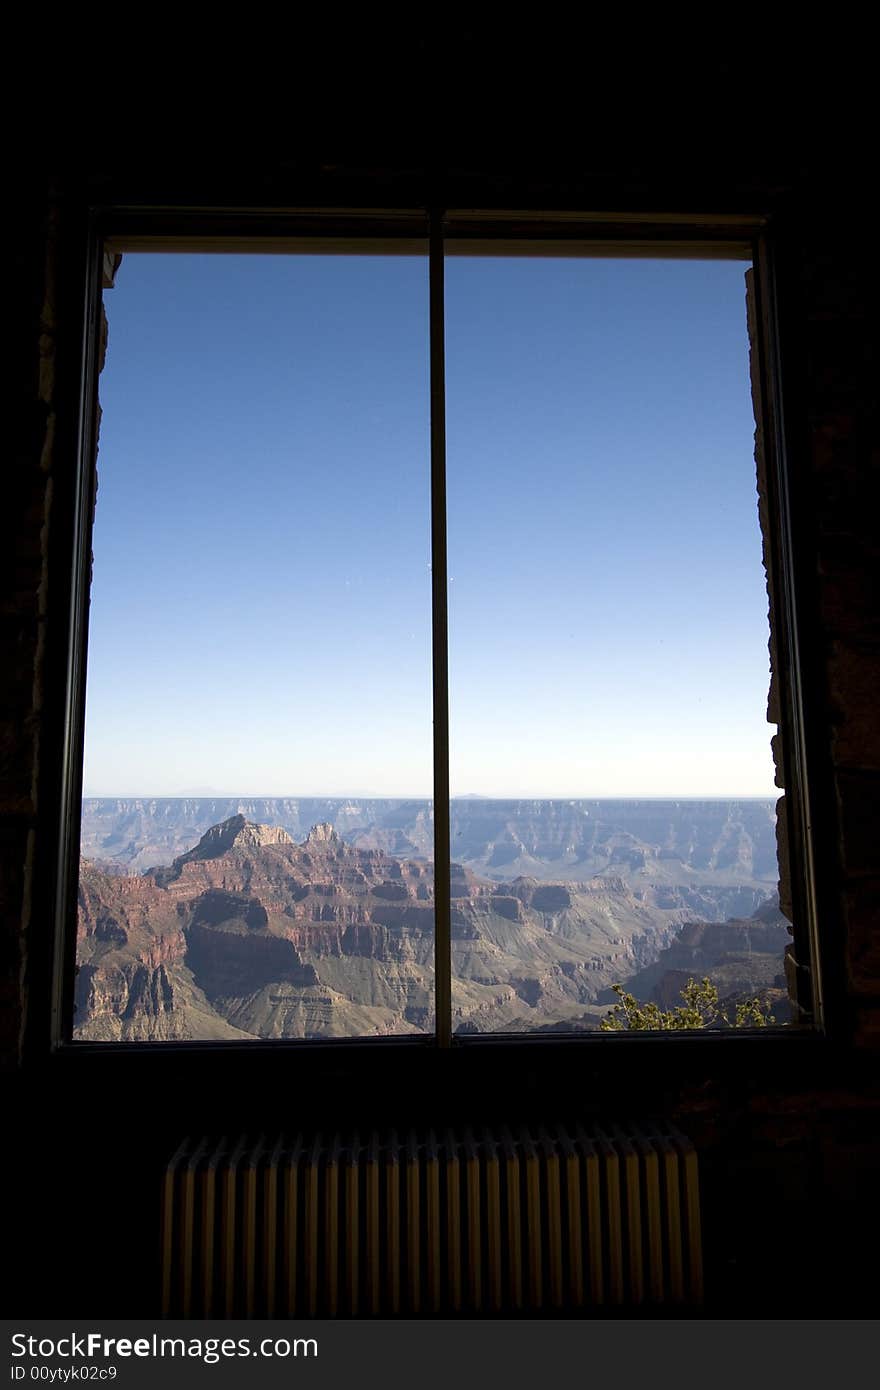 The view from the lodge at the North Rim of the Grand Canyon, Arizona. The view from the lodge at the North Rim of the Grand Canyon, Arizona.